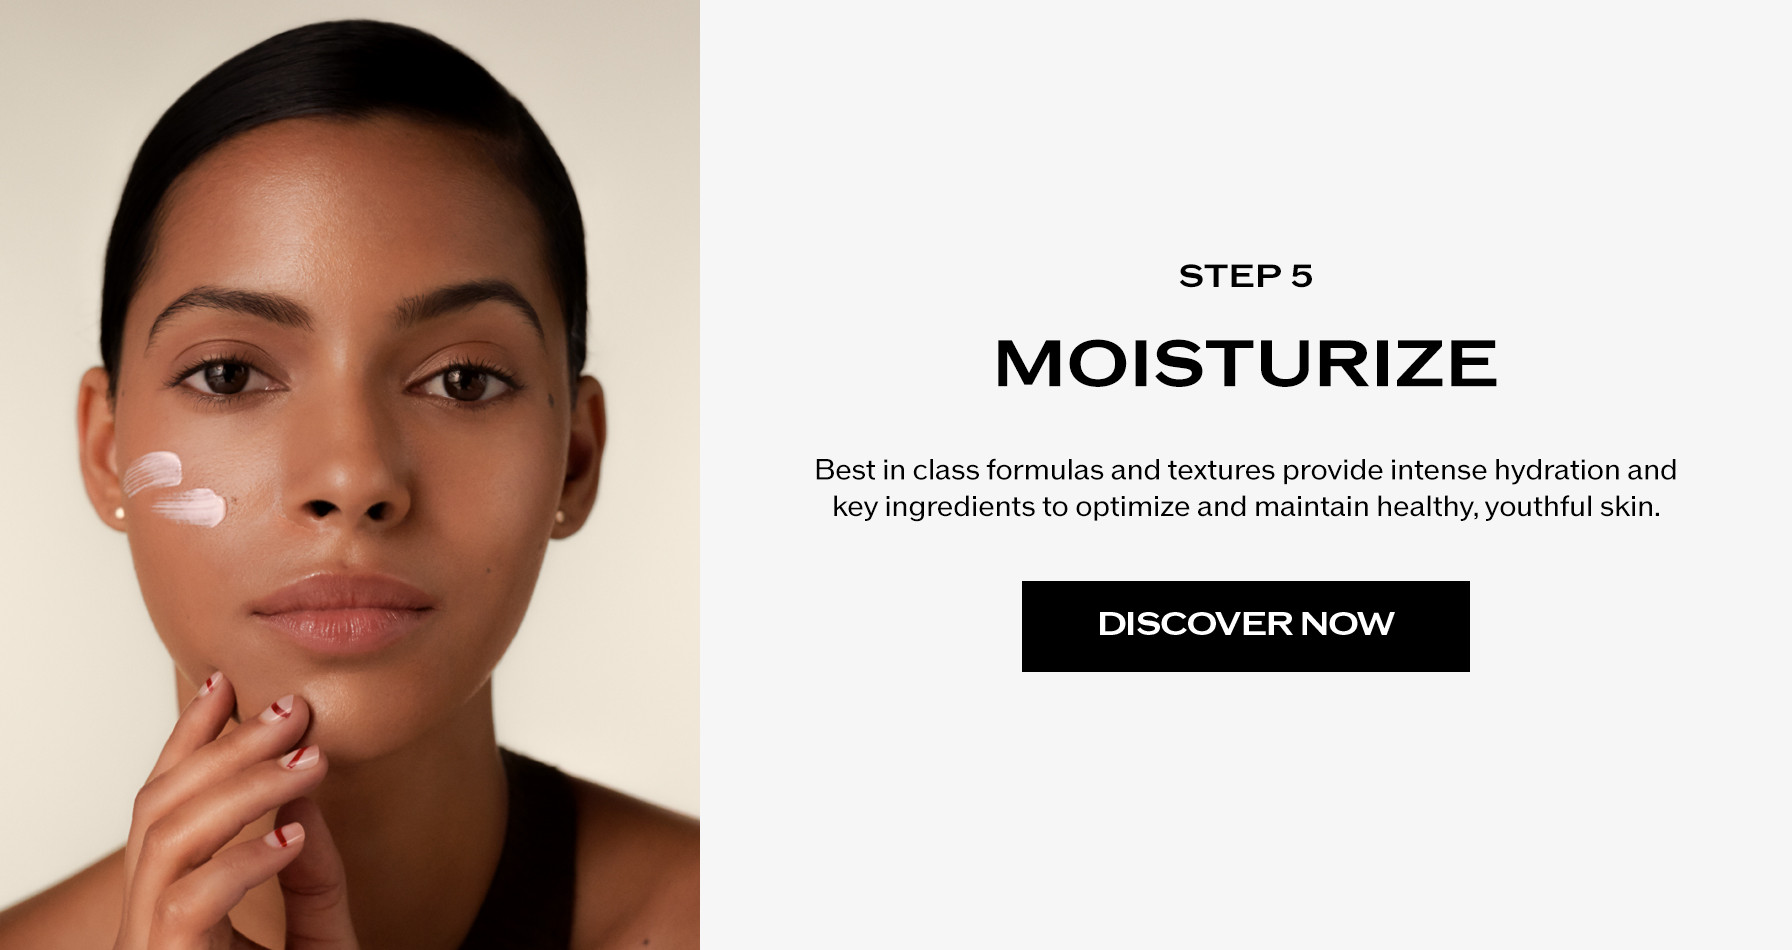 Step 5: Moisturize. Best in class formulas and textures provide intense hydration and key ingredients to optimize and maintain healthy, youthful skin.